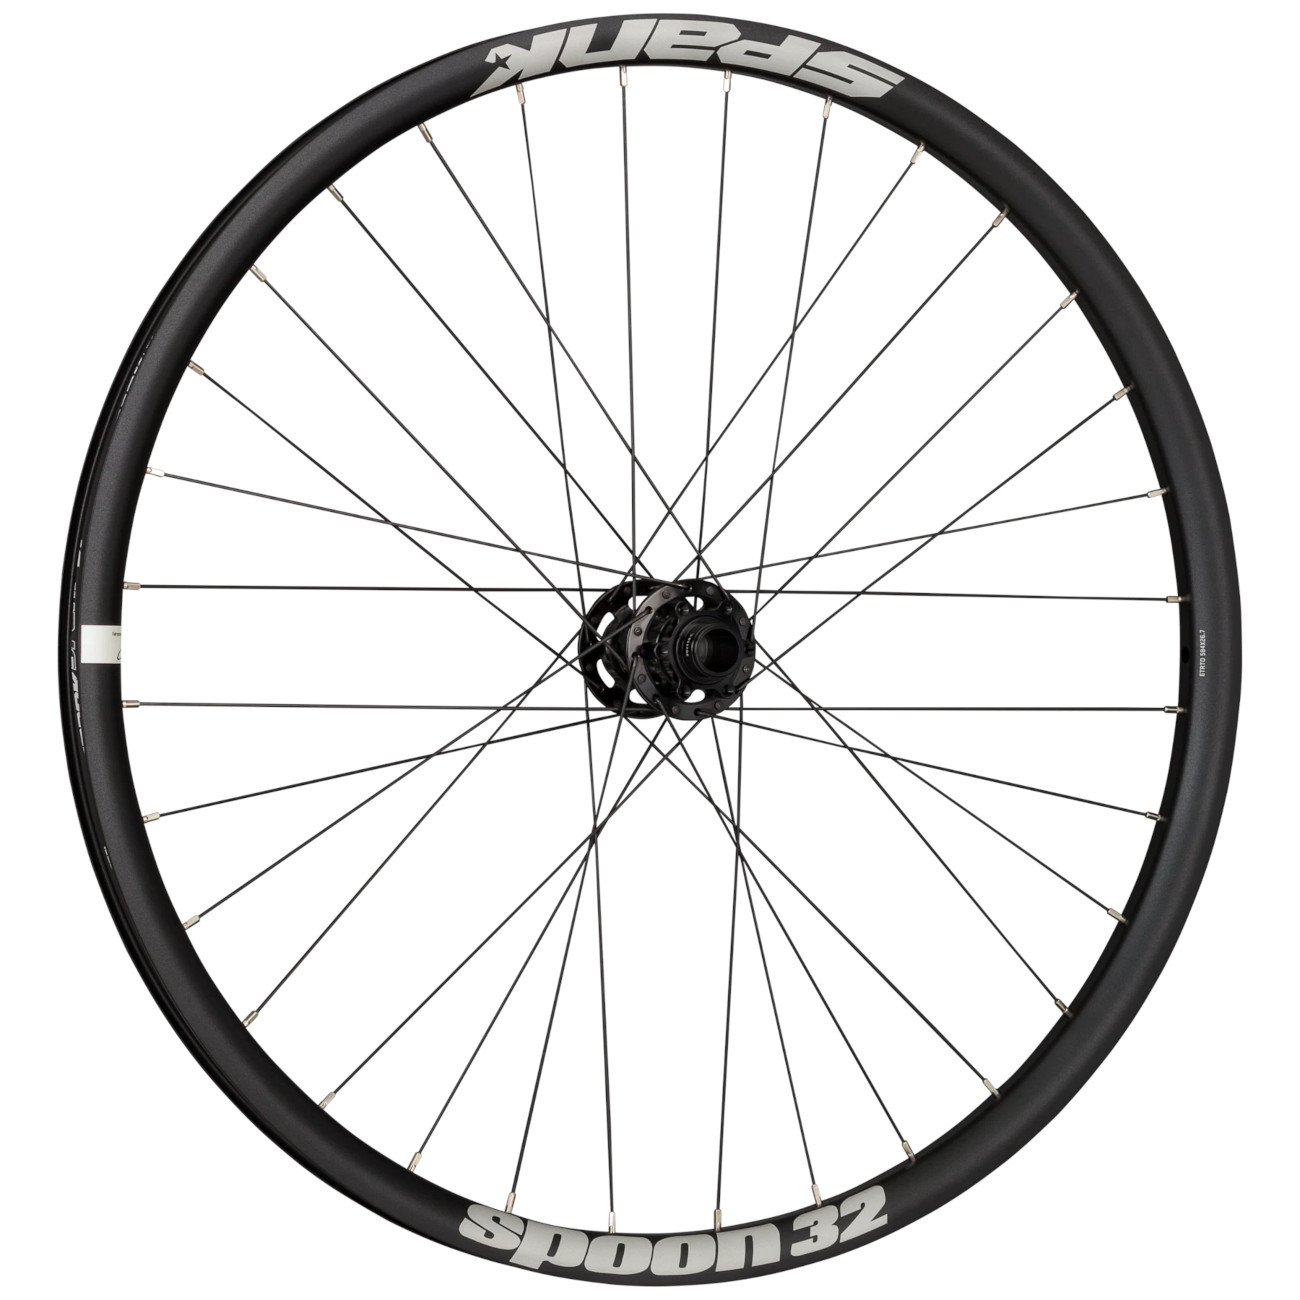 Productfoto van Spank Spoon 32 - 27.5 Inches Front Wheel - 6-Bolt - 15x110mm/20x110mm Boost - black